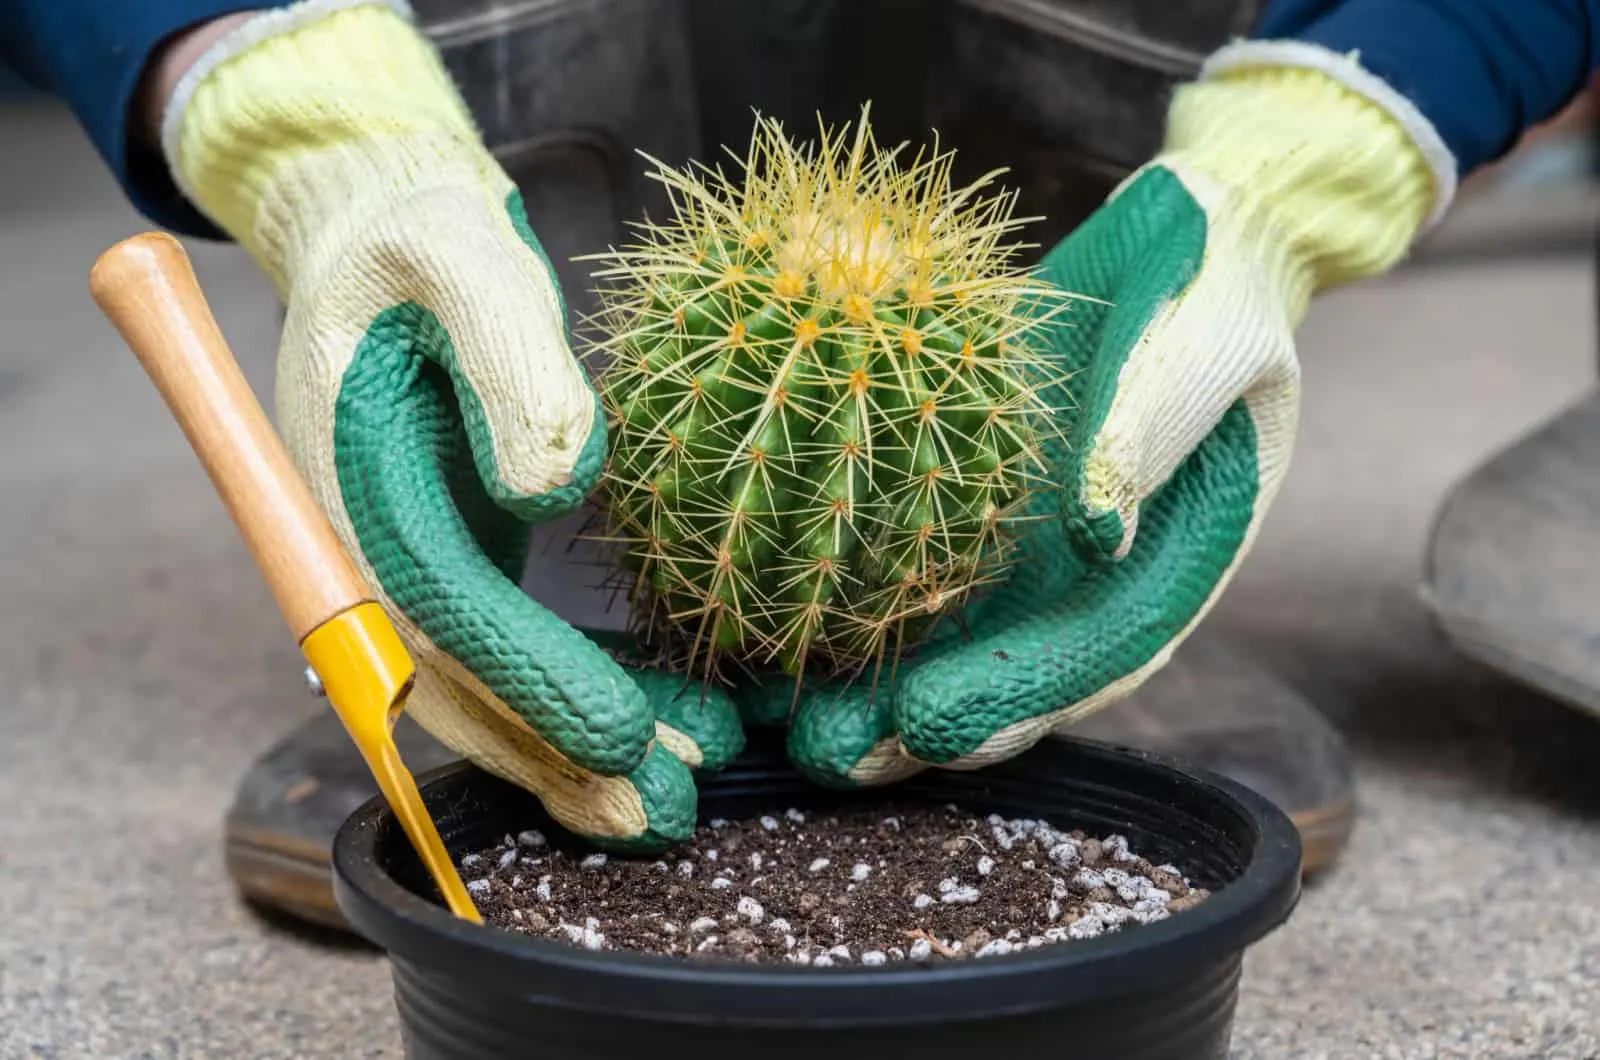 person using gloves to hold cactus